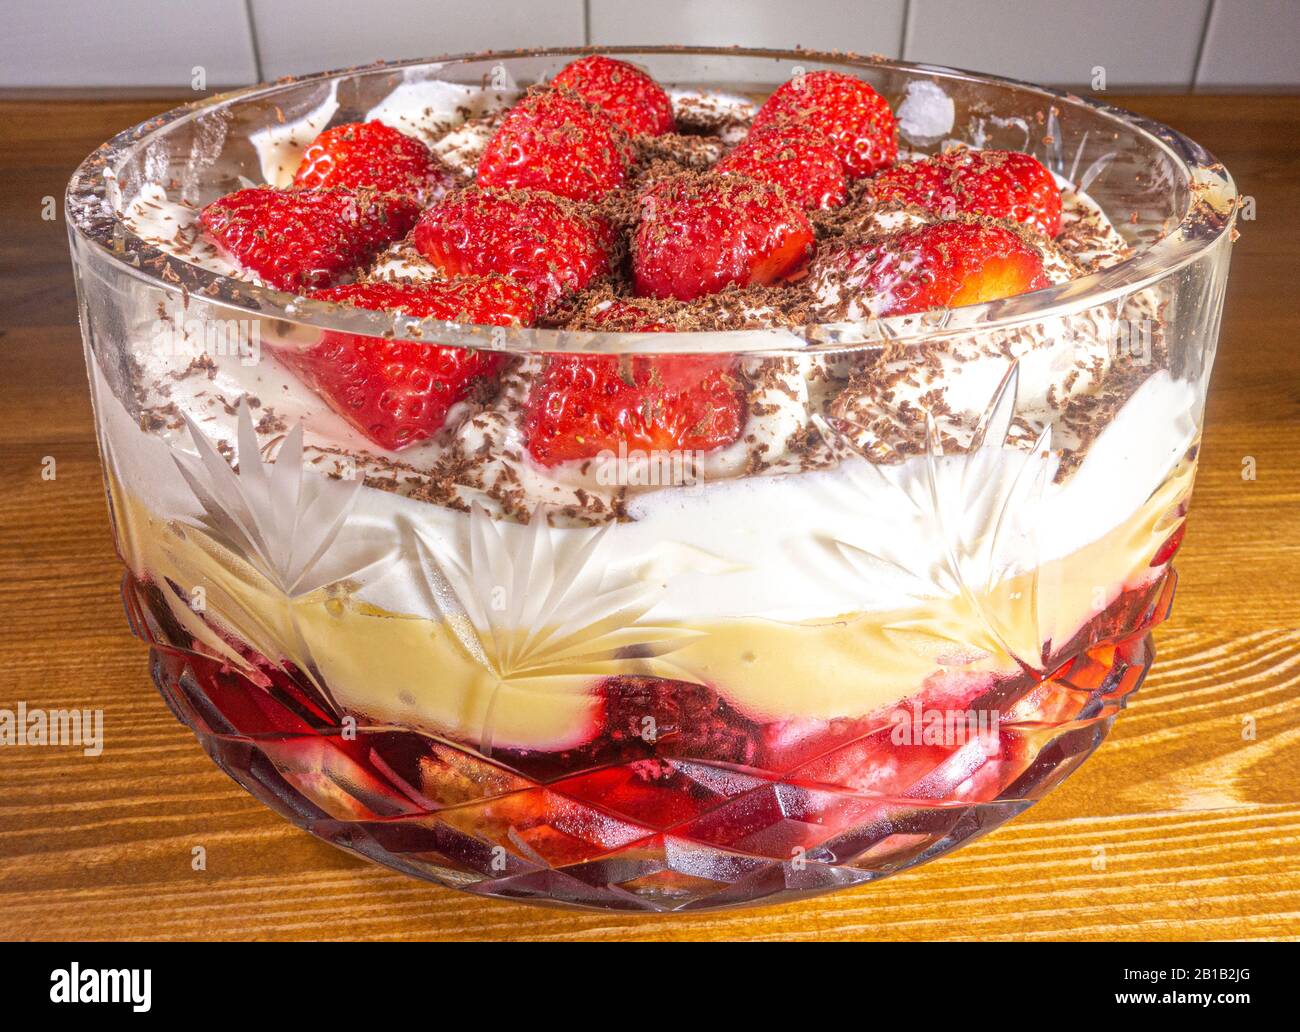 Fresh fruit trifle topped with strawberries in a decorative, crystal glass bowl. Stock Photo